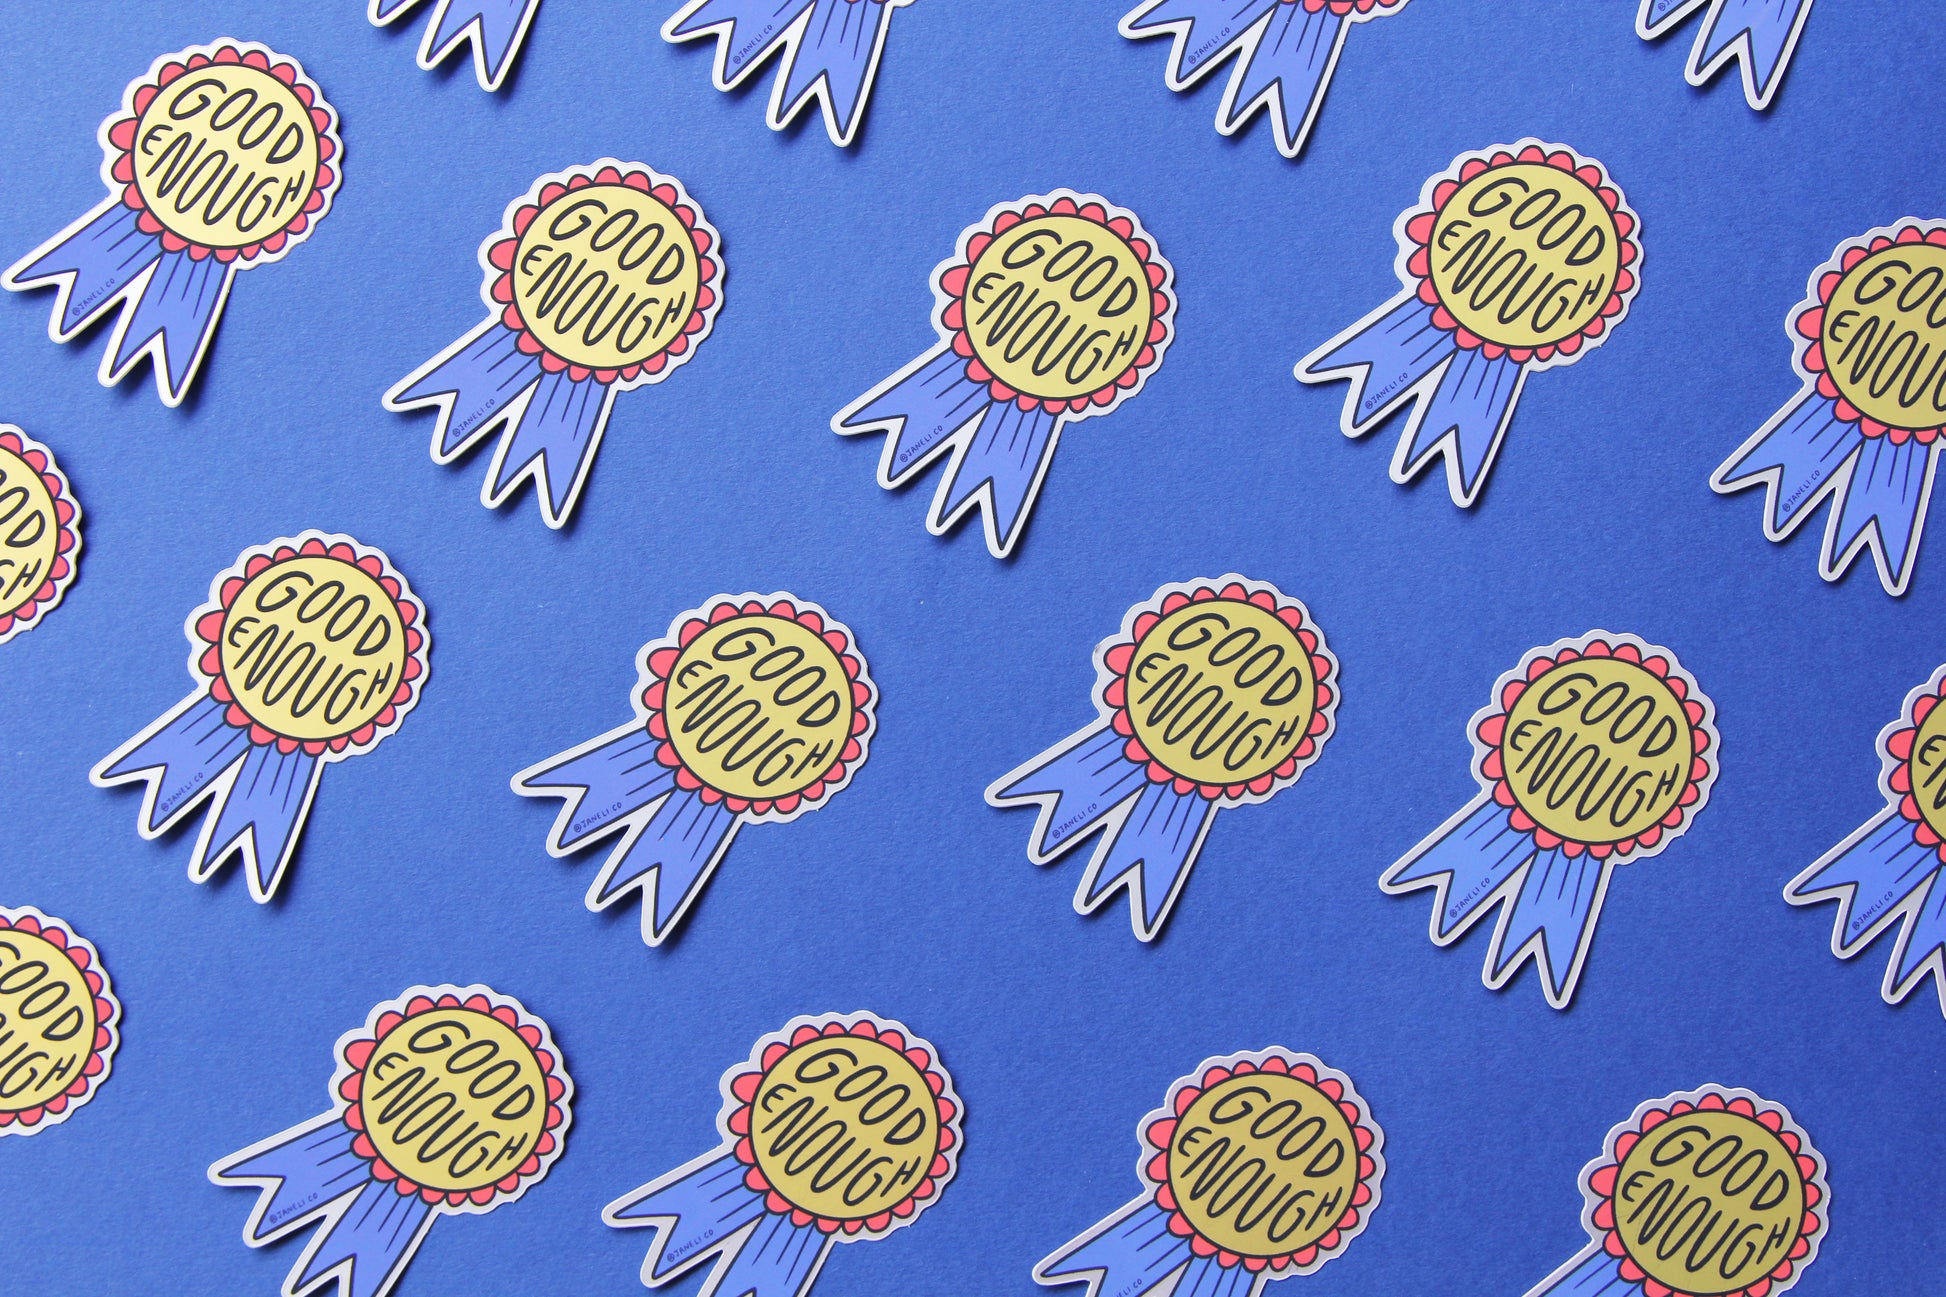 A grid of JaneLi.Co stickers of red and blue award ribbons that say "Good Enough" over a blue background.